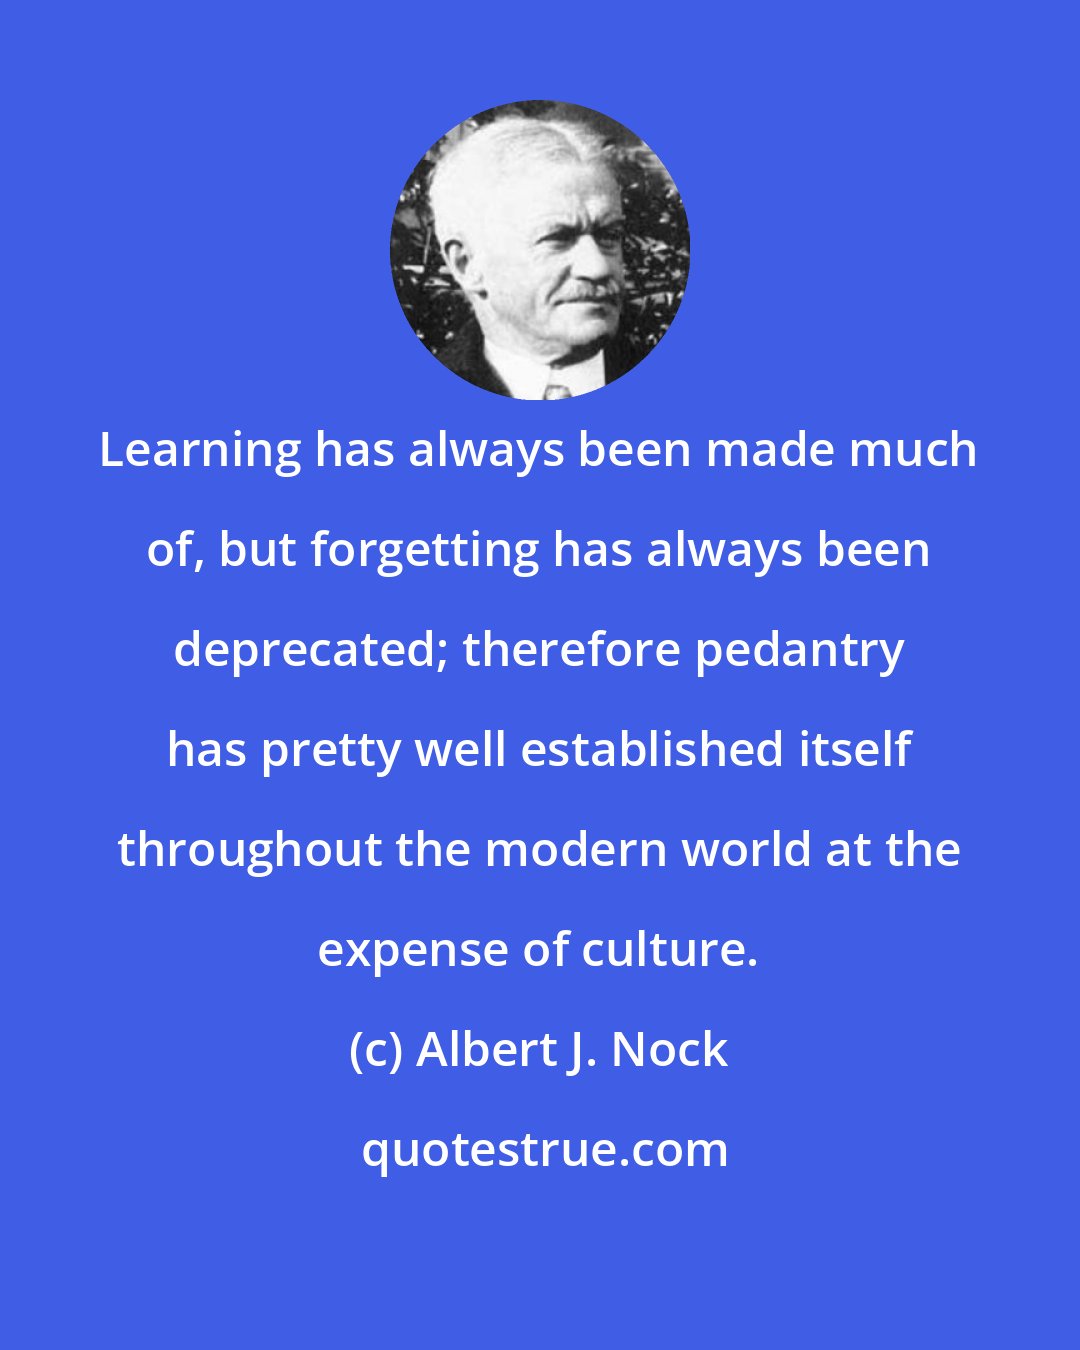 Albert J. Nock: Learning has always been made much of, but forgetting has always been deprecated; therefore pedantry has pretty well established itself throughout the modern world at the expense of culture.